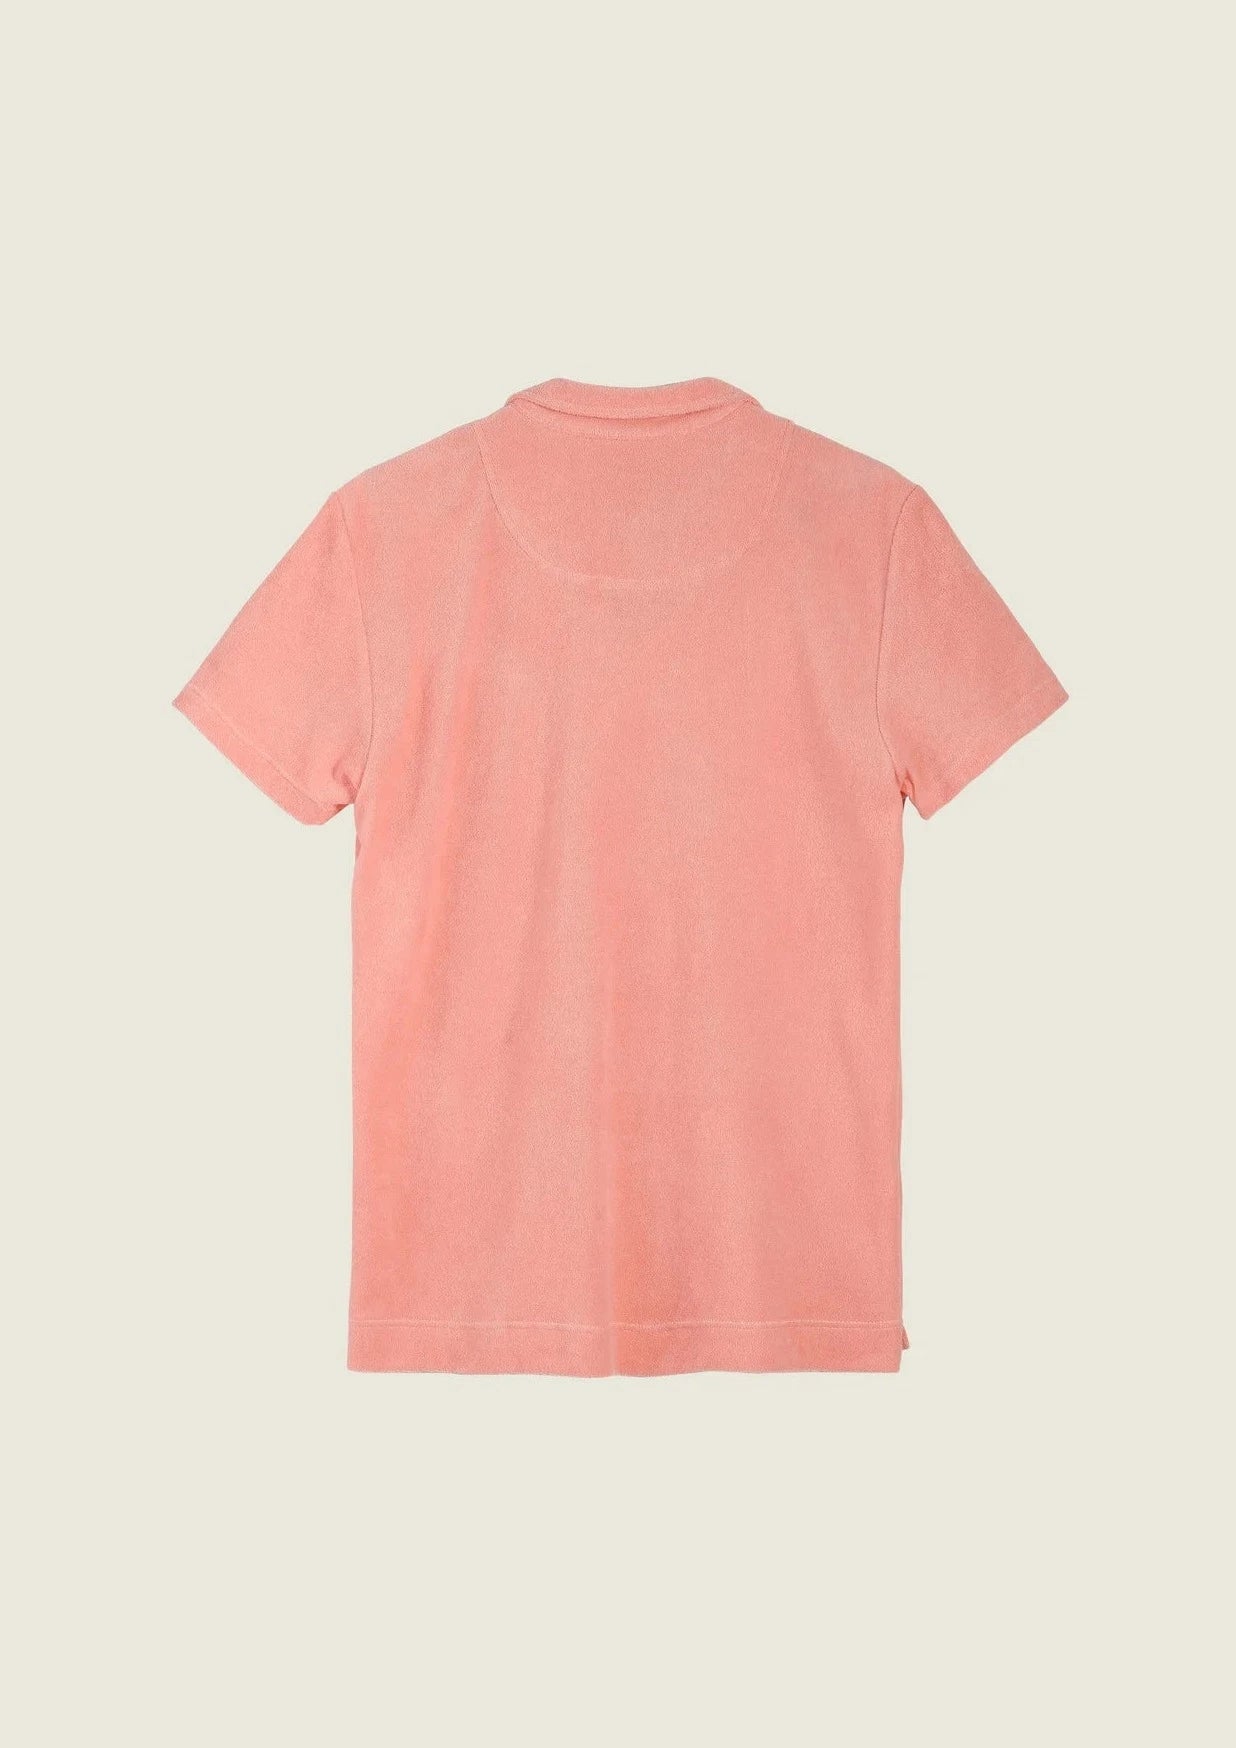 OAS NEW PINK POLO TERRY SHIRT